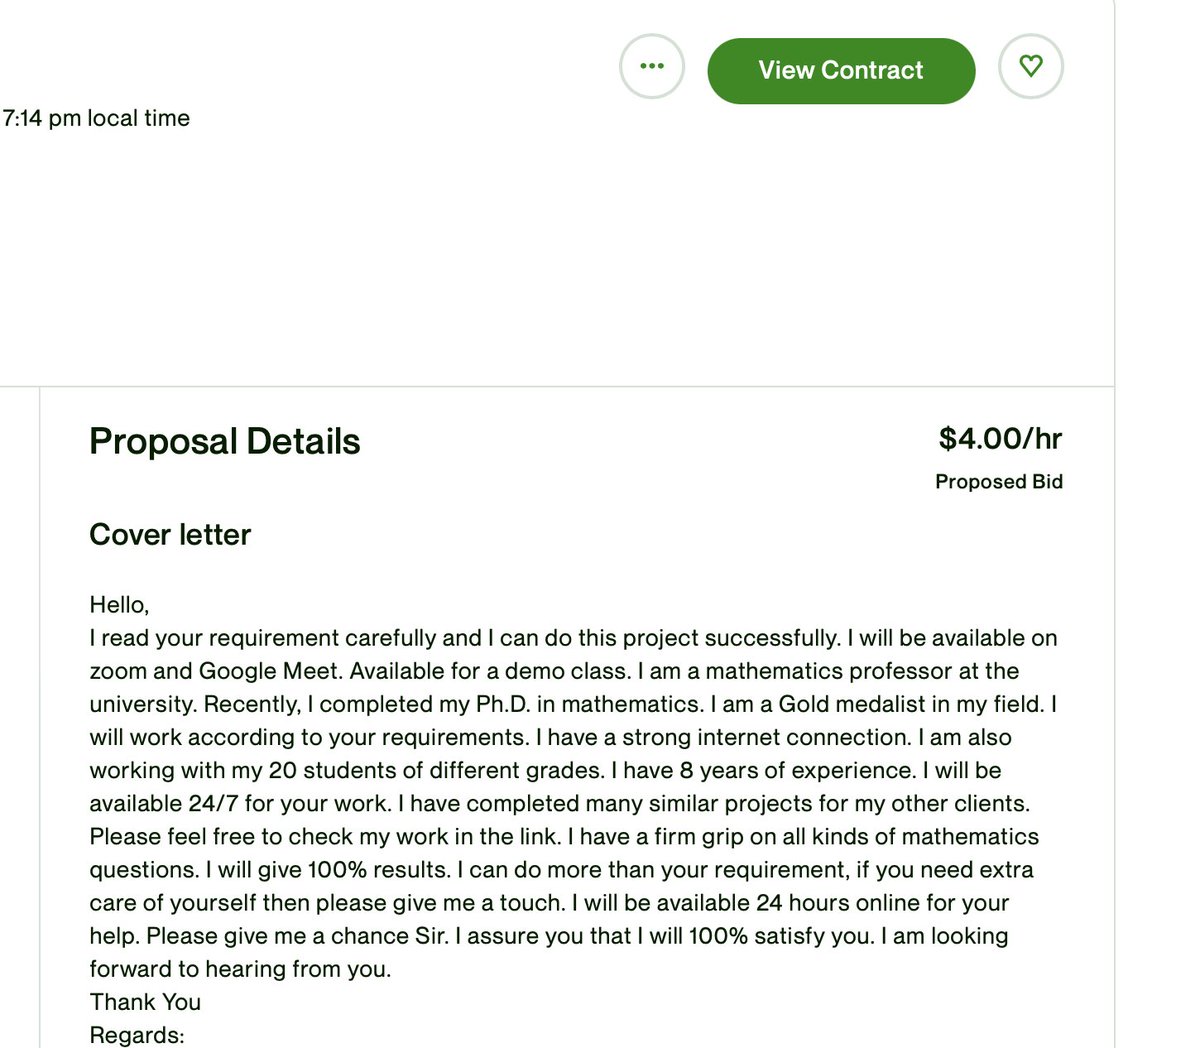 Last night my 12 year old was struggling with Algebra, so I immediately posted a job for a tutor on Upwork.

Literally 10 minutes later we were Zooming with a PhD professor in Pakistan for $4/hour. 

She whipped him into shape & will help him 5 hours/week now.

Impatience can be